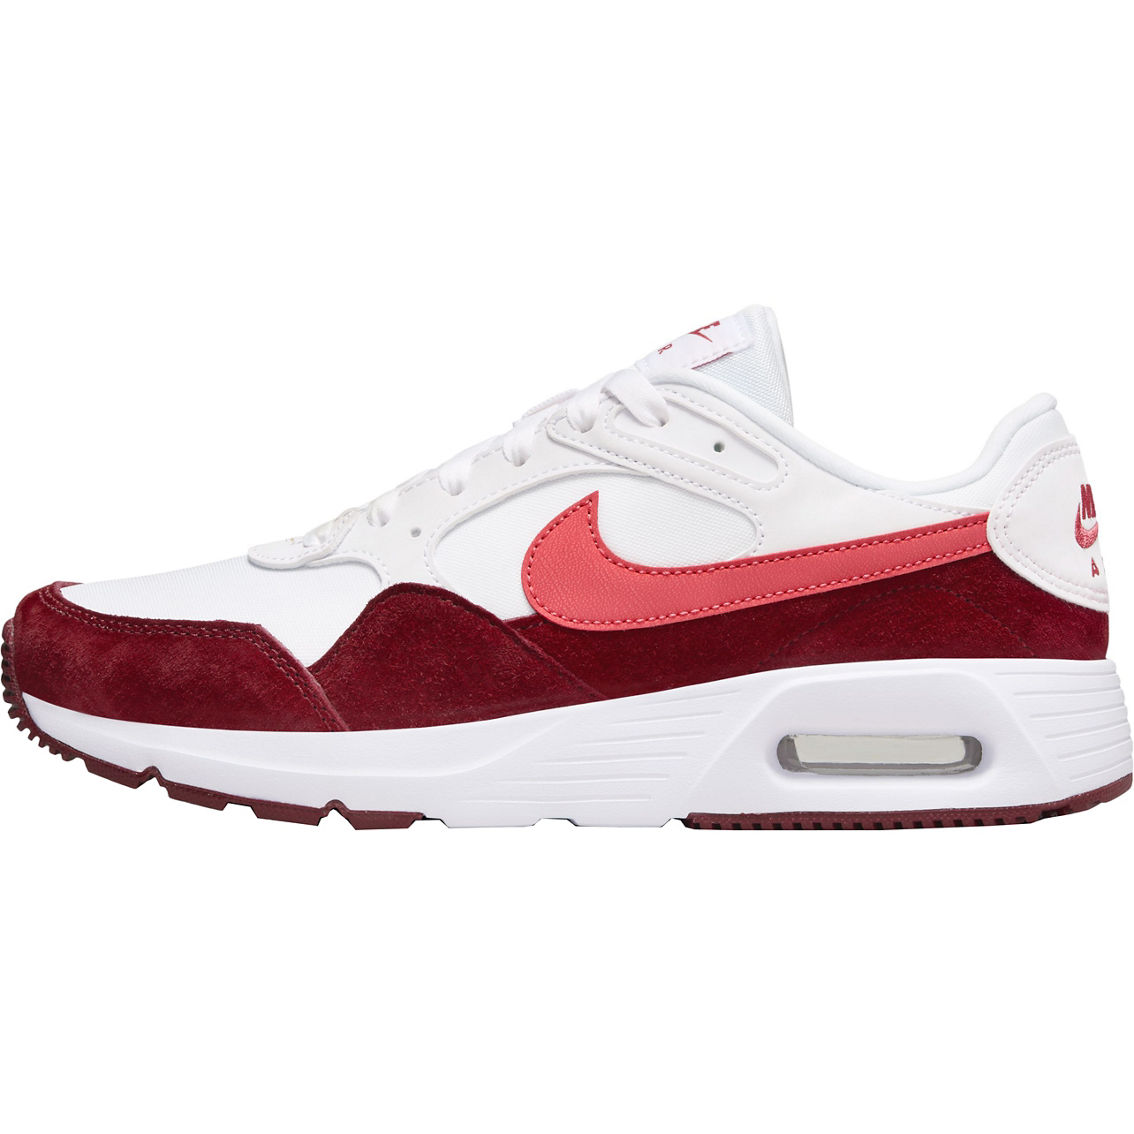 Nike Women's Air Max SC Shoes - Image 3 of 9